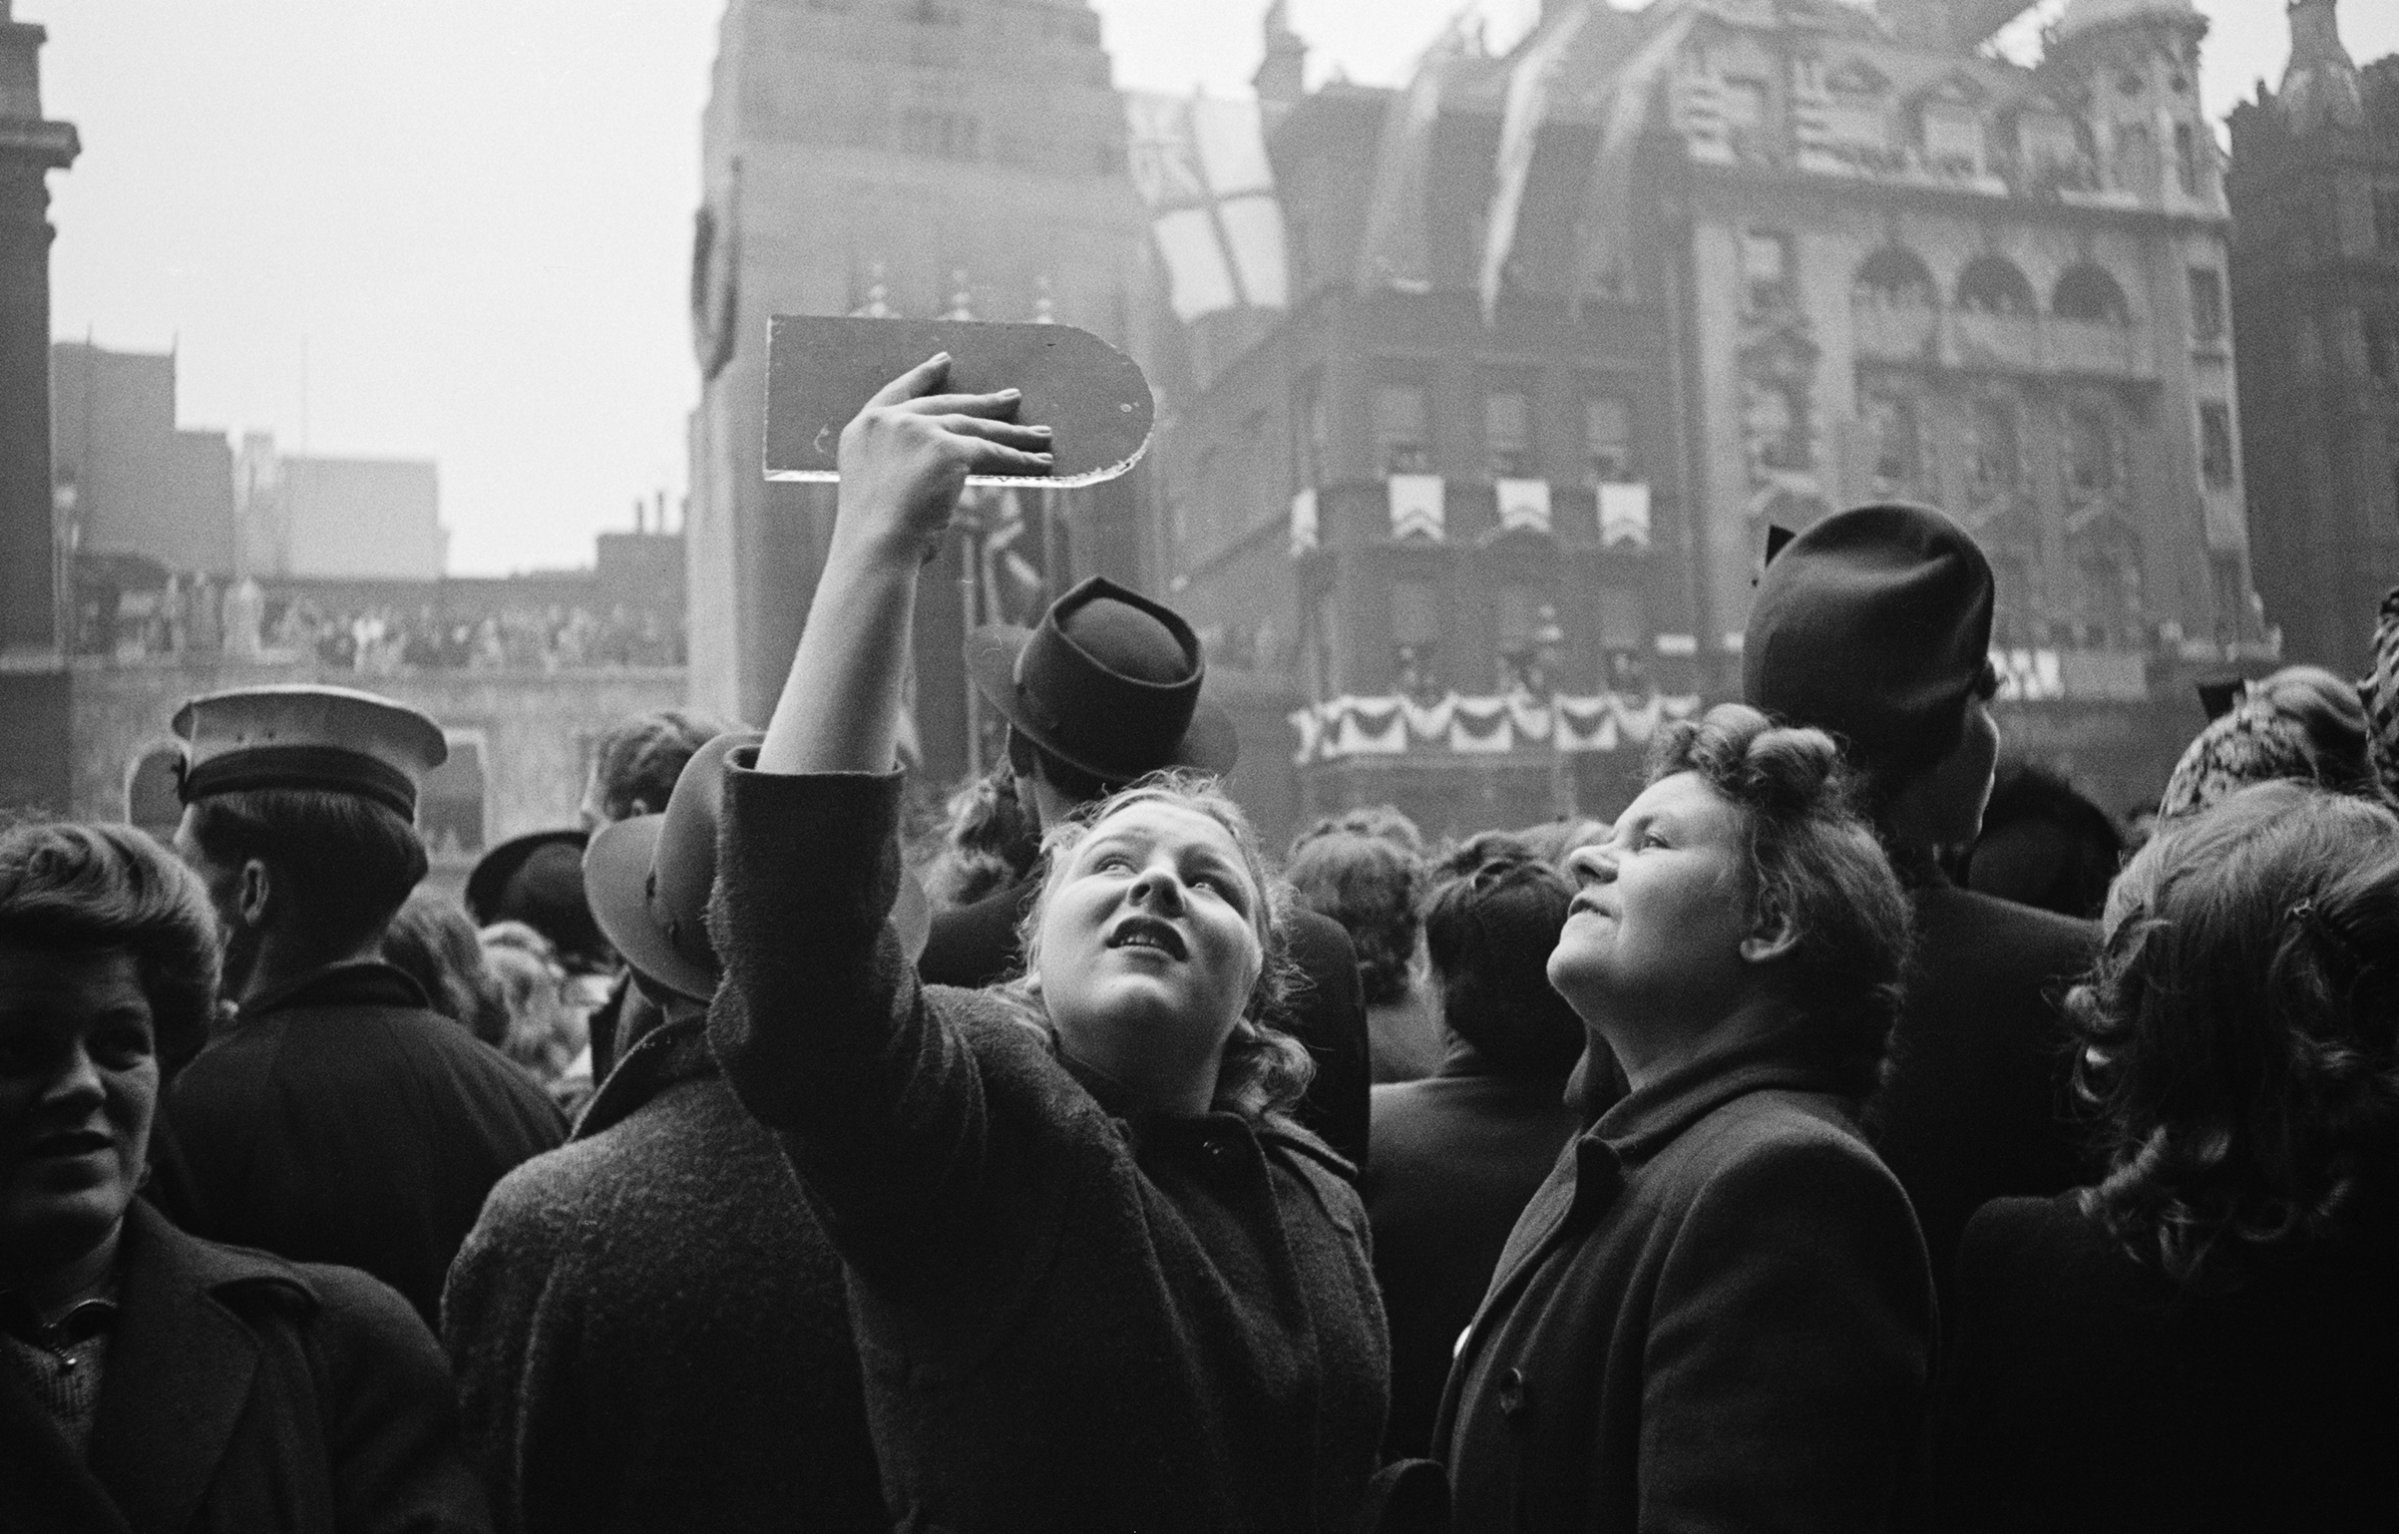 Spectators use hand-held mirrors to see over the crowd during the wedding of Queen Elizabeth II and Prince Philip, Duke of Edinburgh, at Westminster Abbey in London, Nov. 20, 1947.